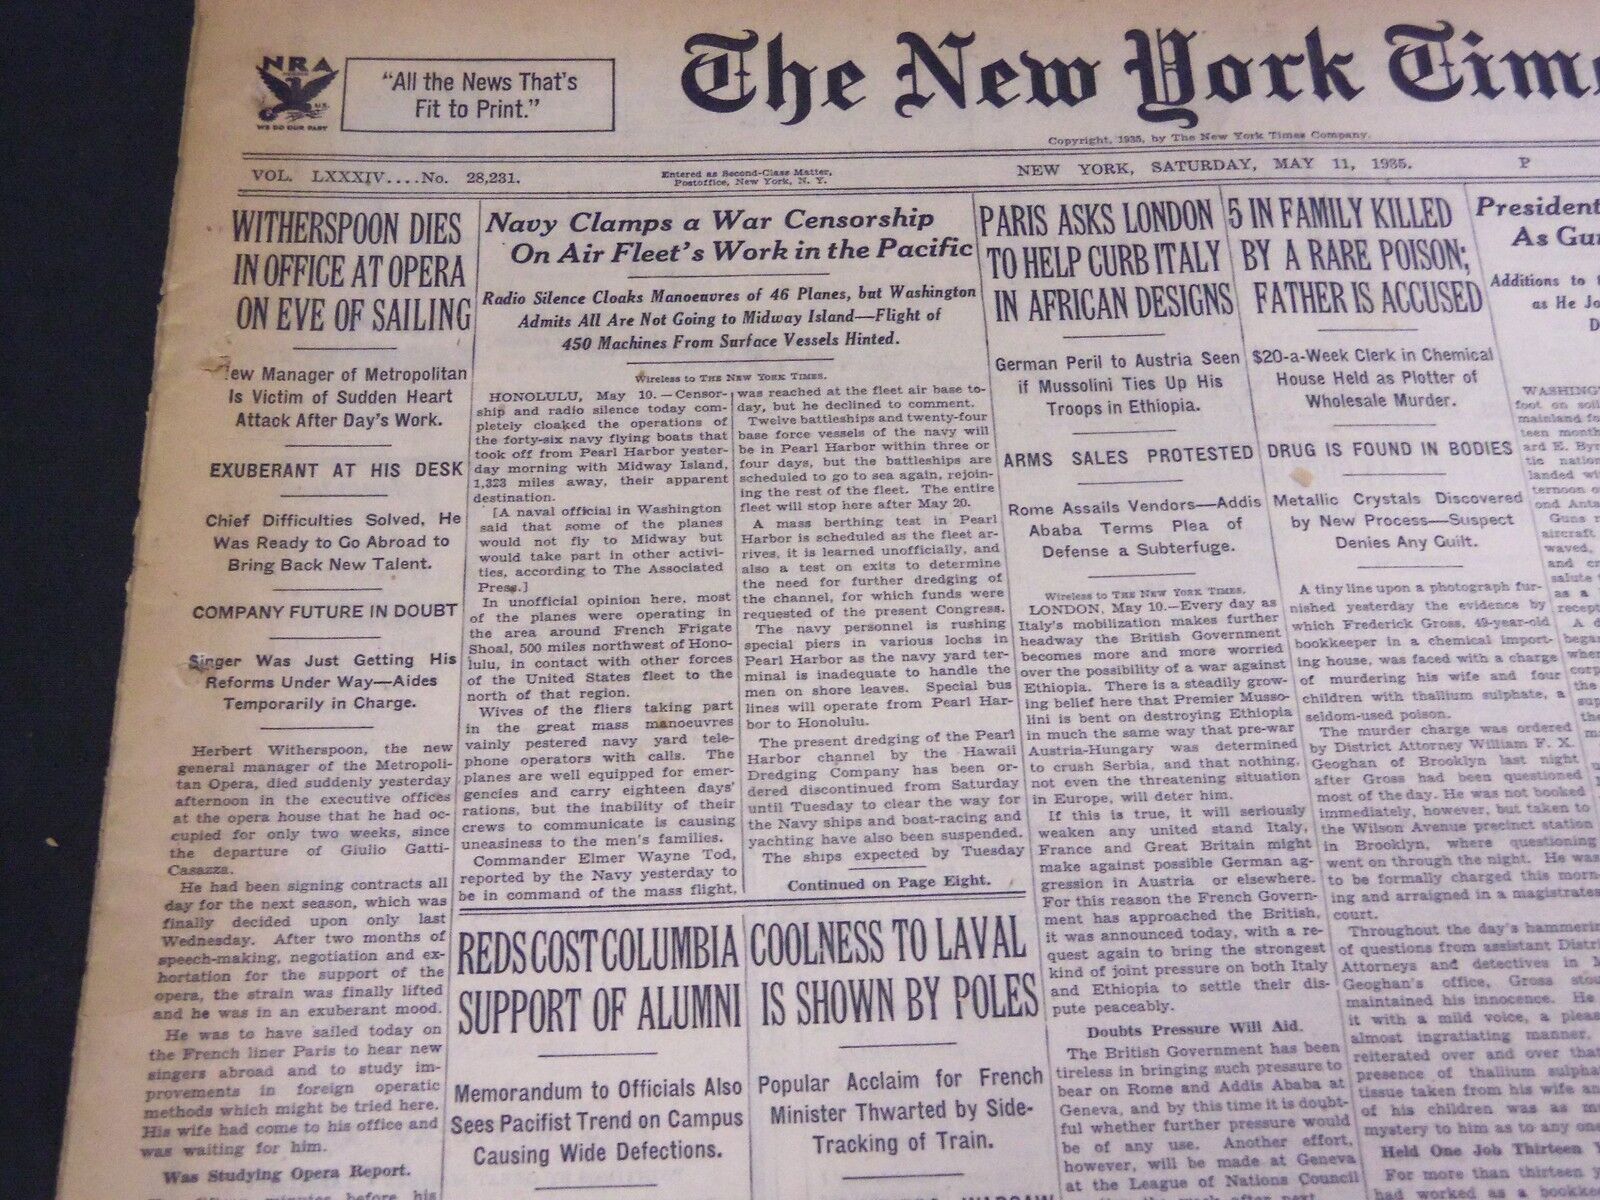 1935 MAY 11 NEW YORK TIMES - WITHERSPOON DIES IN OFFICE AT OPERA - NT 4844